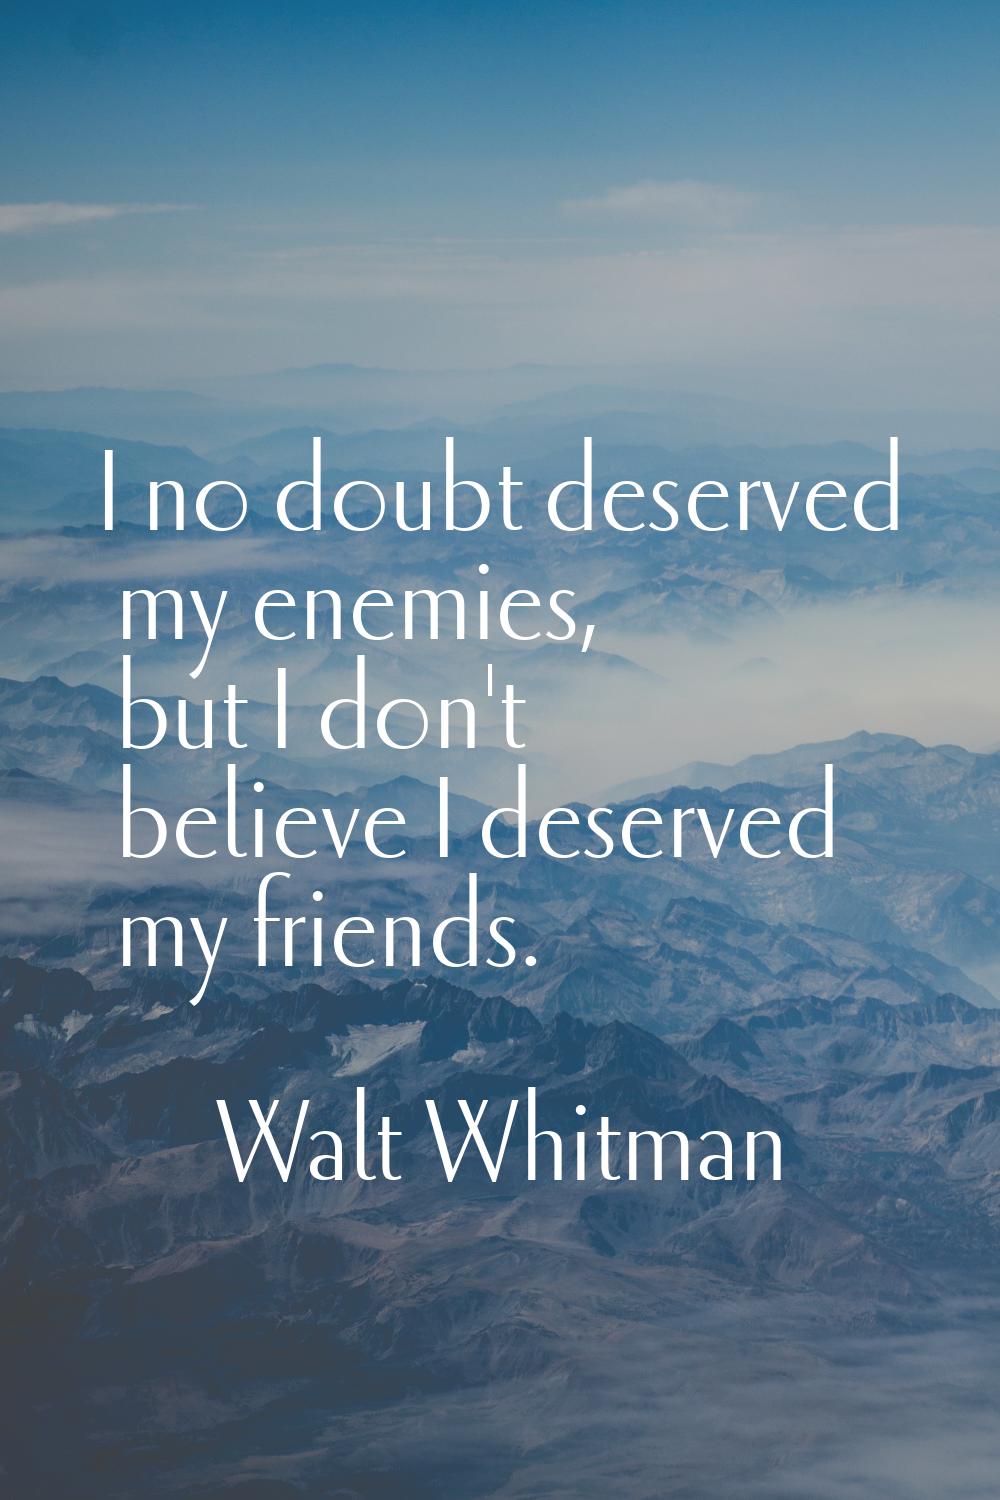 I no doubt deserved my enemies, but I don't believe I deserved my friends.